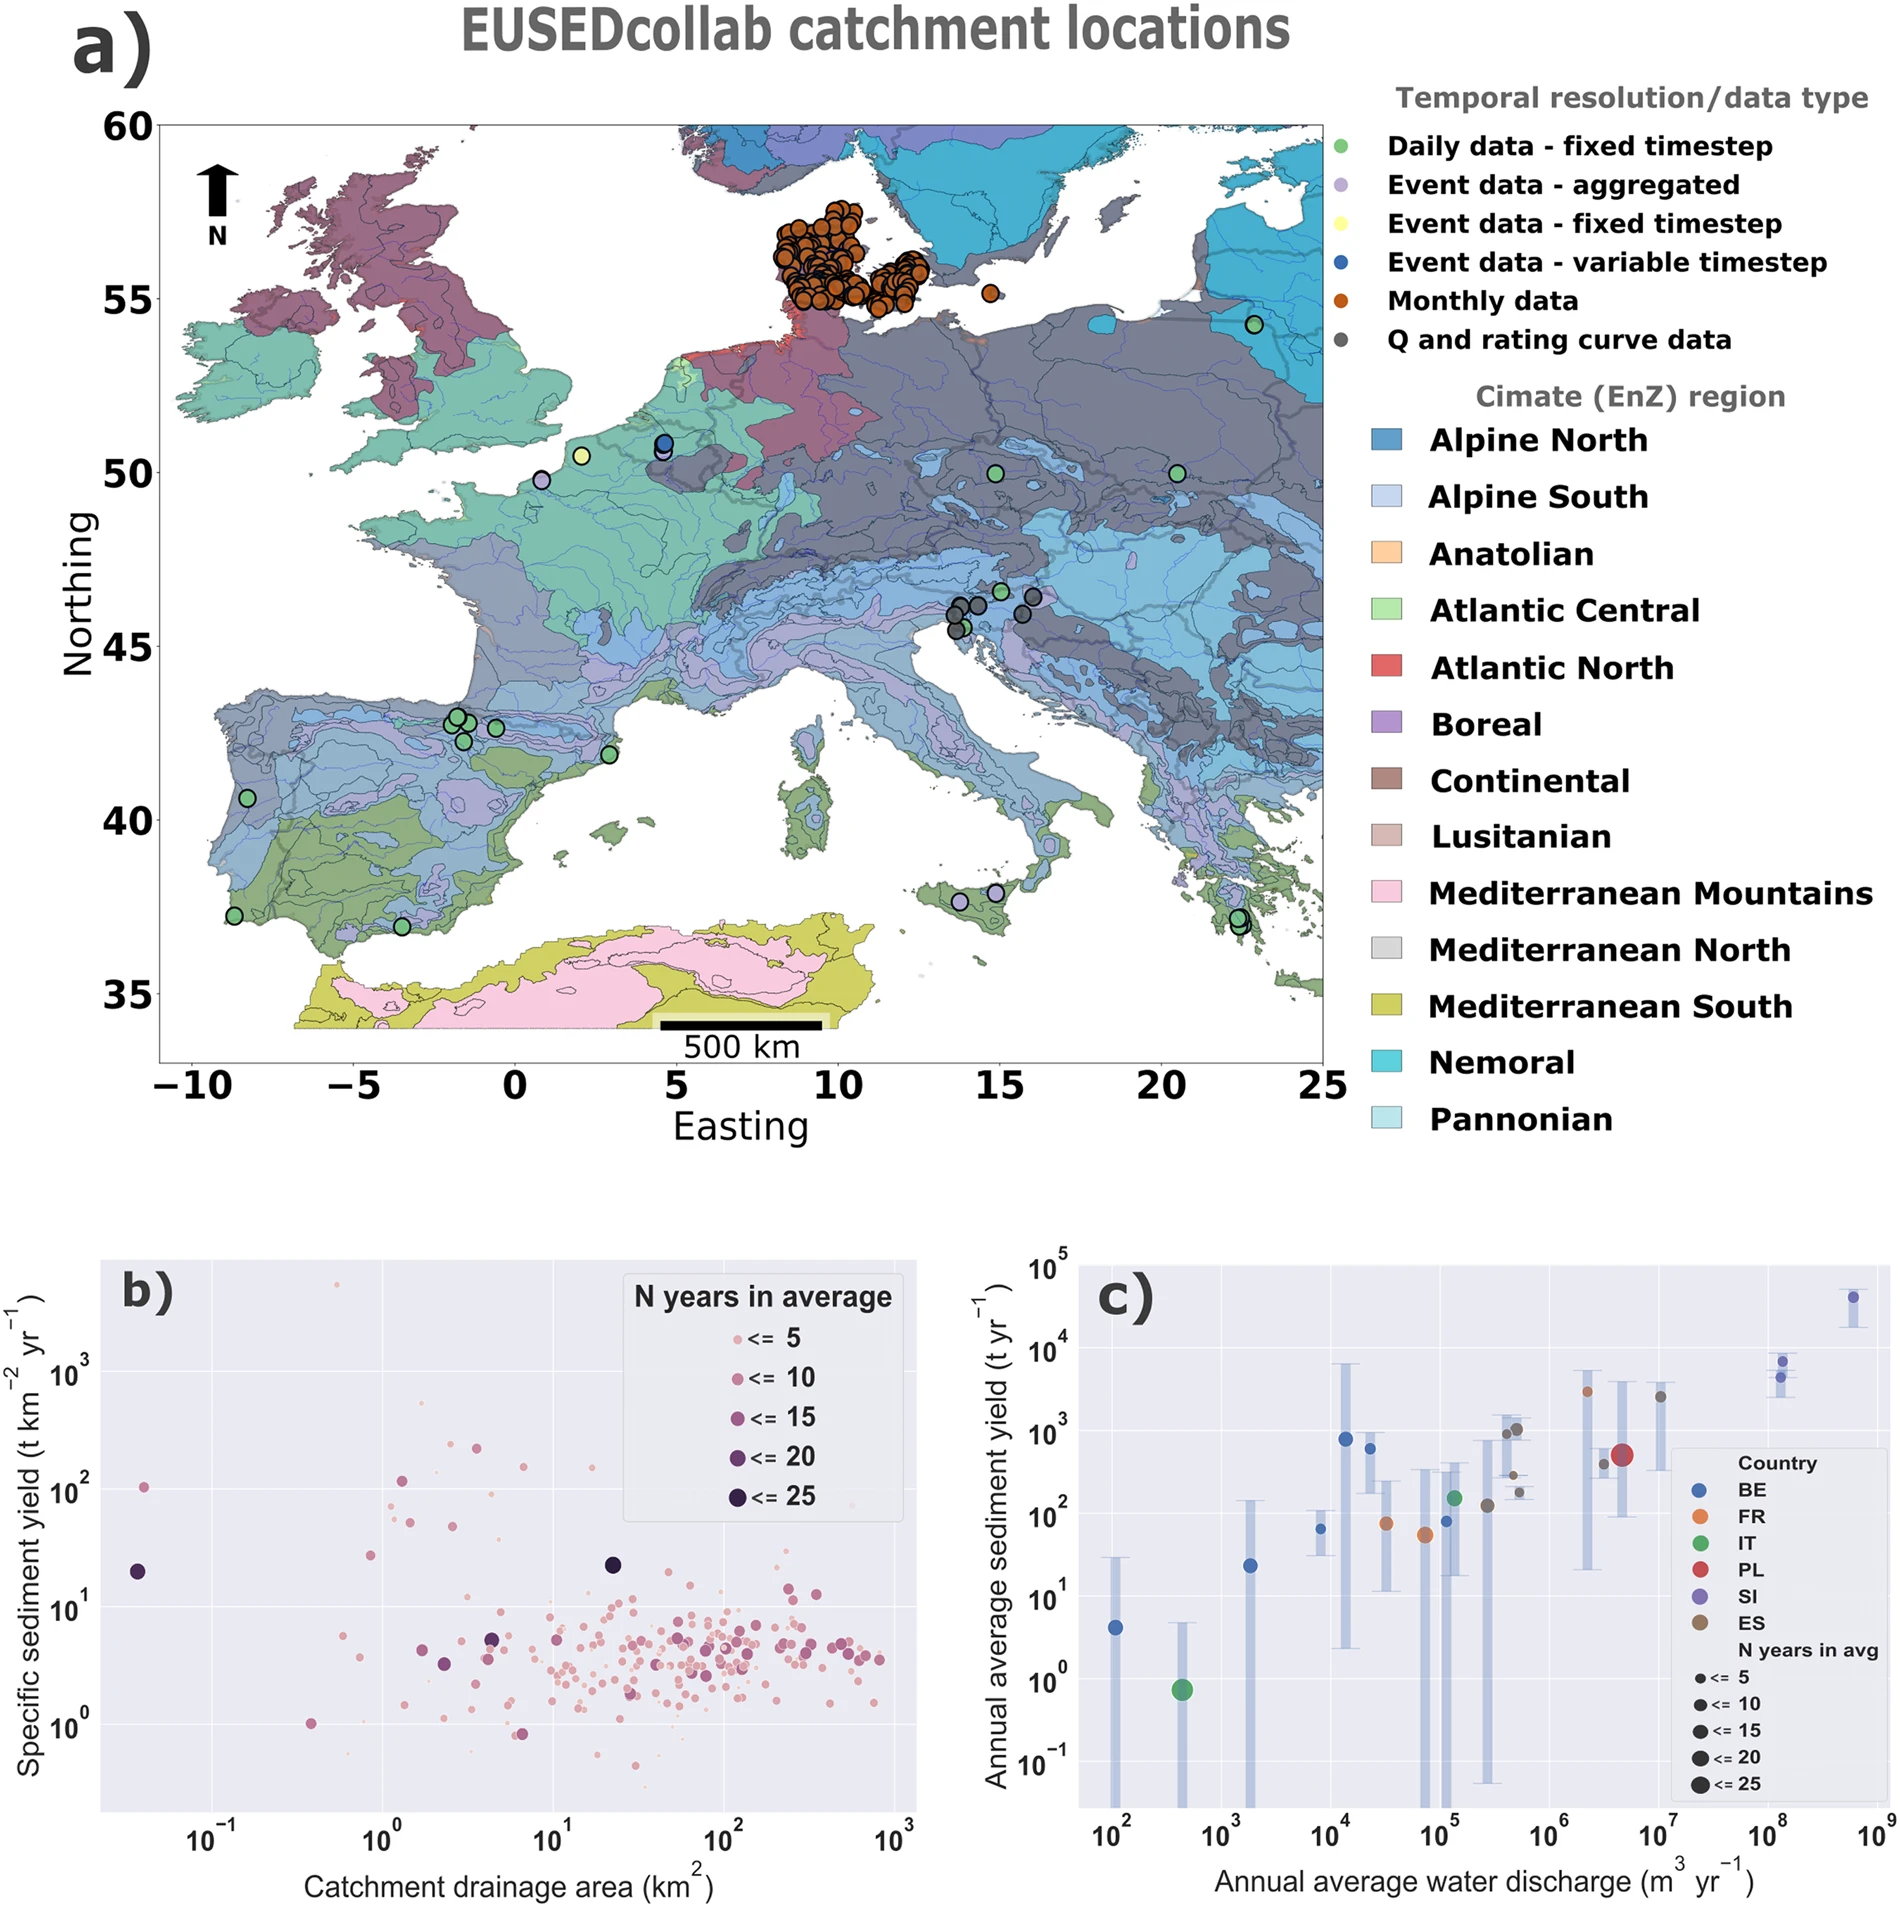 Top: A geographical overview of EUSEDcollab.v1 data entries per climate (EnZ) region in Europe (a). Bottom: summary-level empirical relationships found within the database entries, showing a) the relationship between catchment area (km2) and specific sediment yield (t km2 yr−1), and (b) the relationship between mean annual discharge (m3 yr−1) and the mean annual sediment yield (t yr−1) for all high temporal resolution datasets (excluding monthly data). The error bars show the variation of the annual sediment yield values around the mean annual average.